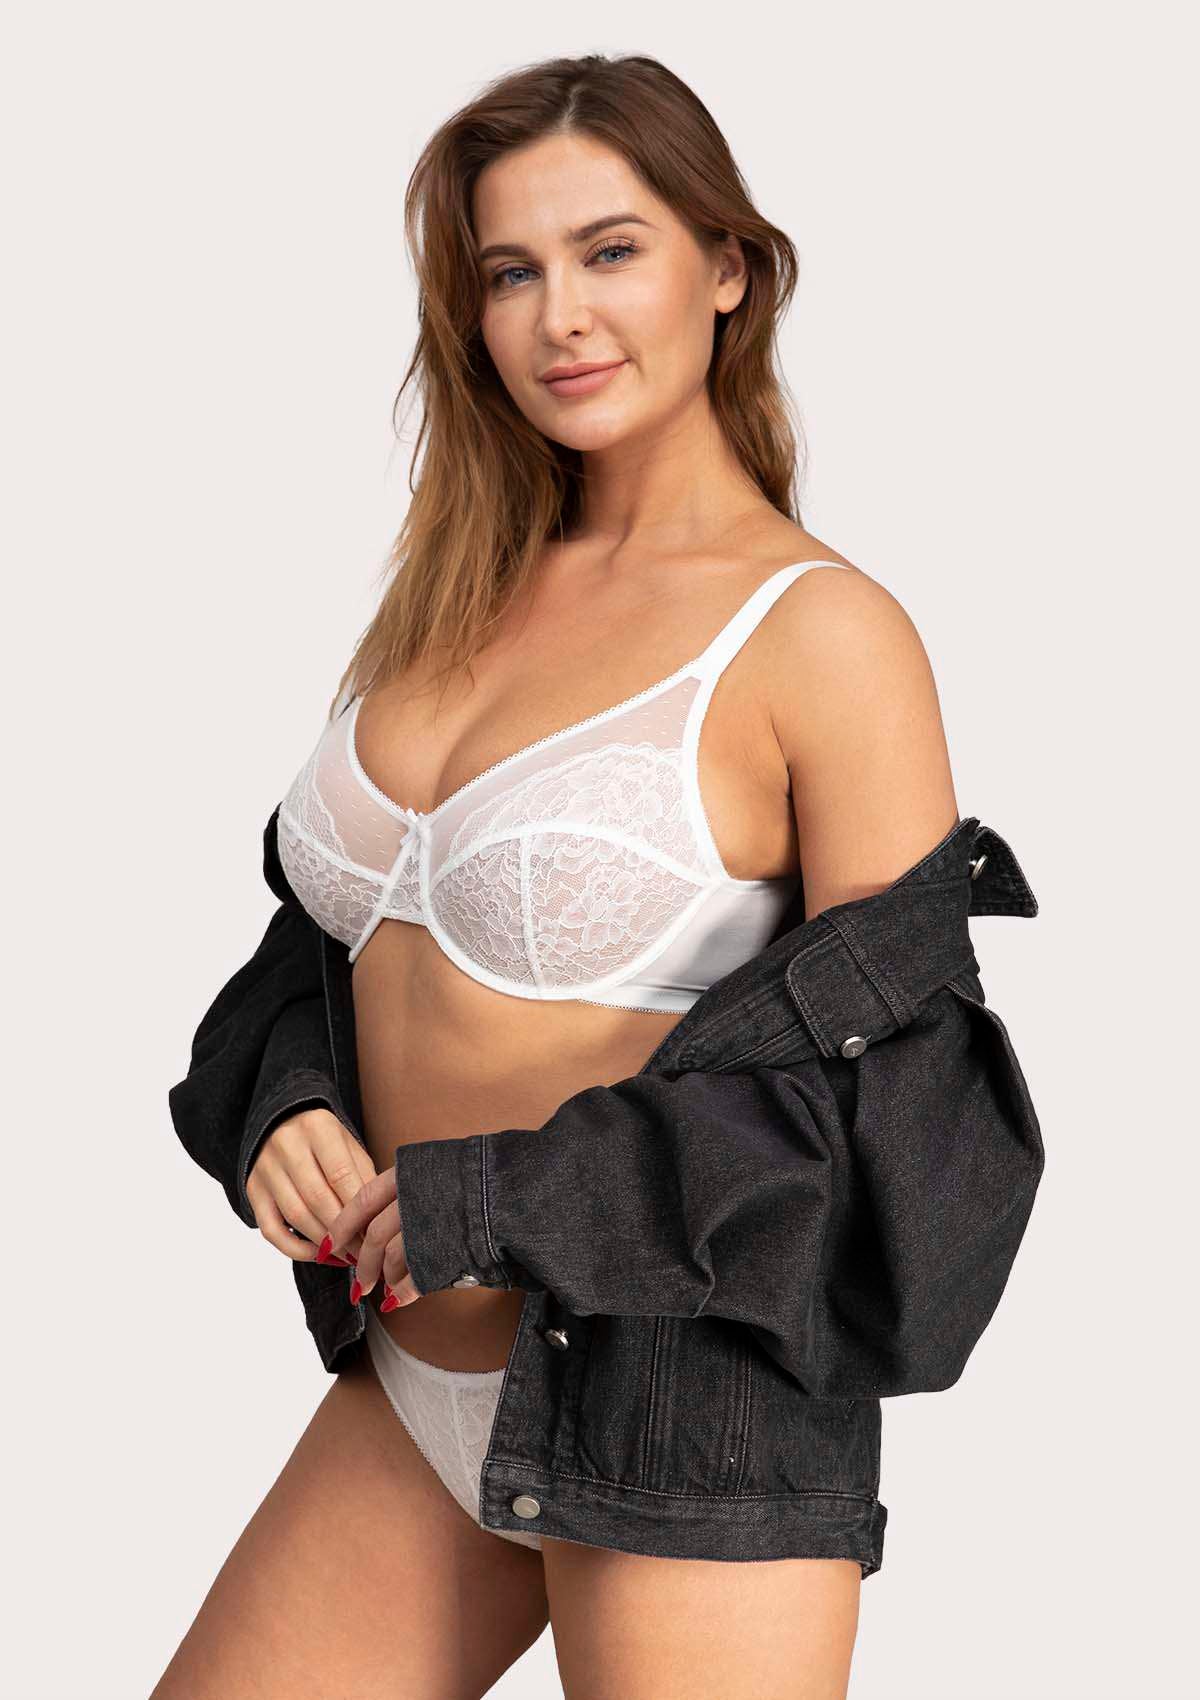 HSIA Enchante Lace Bra And Panties Set: Bra For Side And Back Fat - White / 46 / C